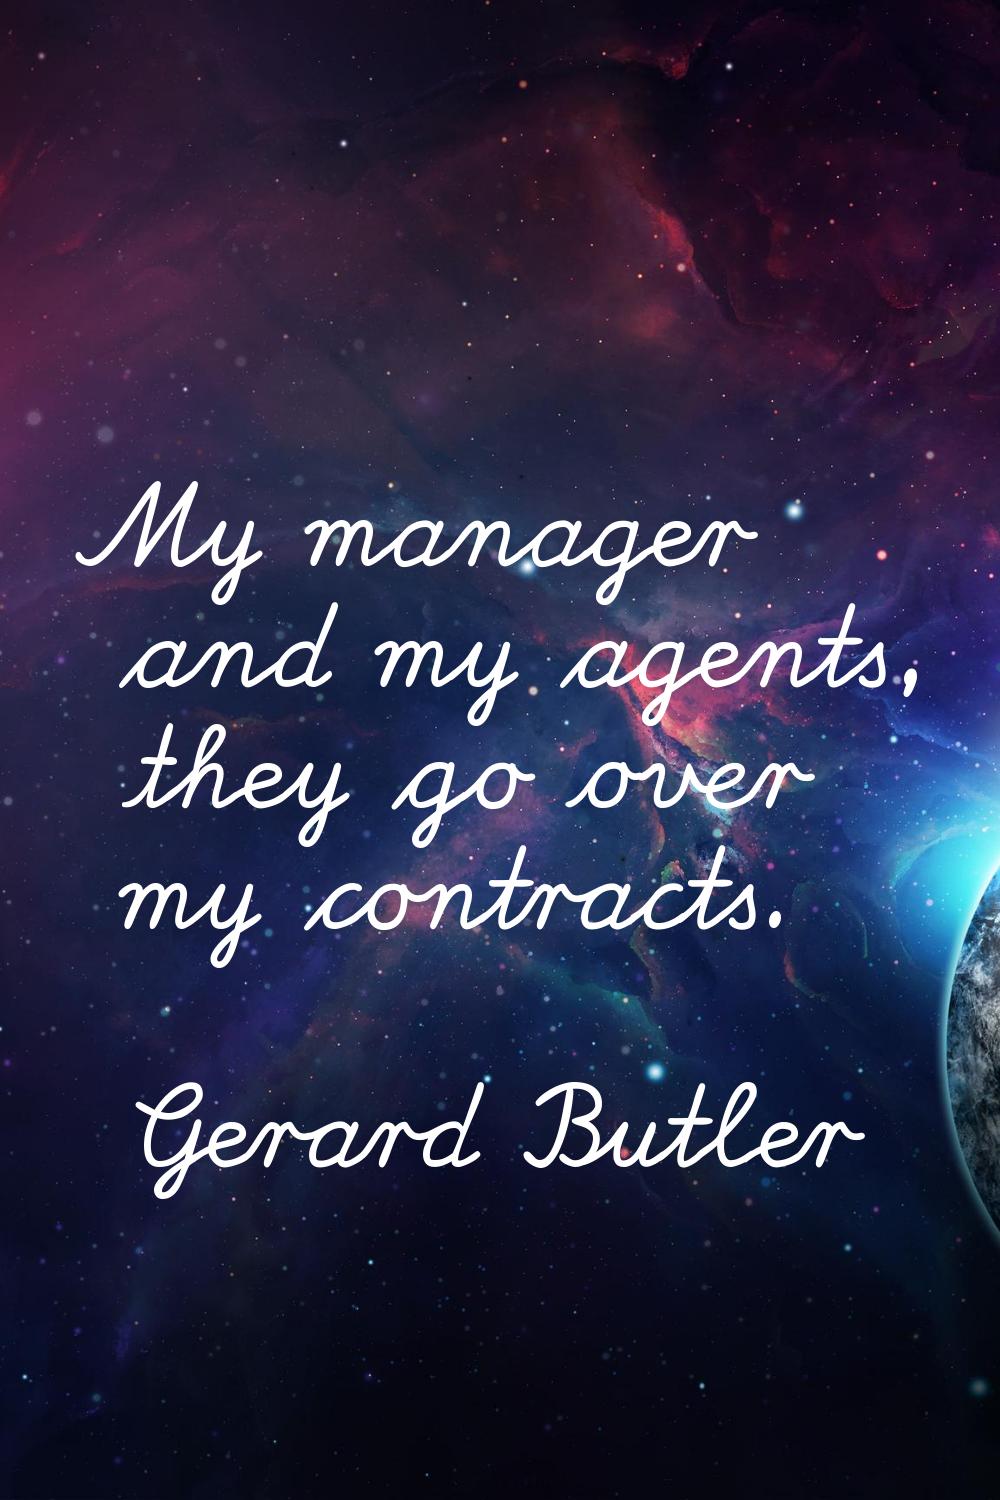 My manager and my agents, they go over my contracts.